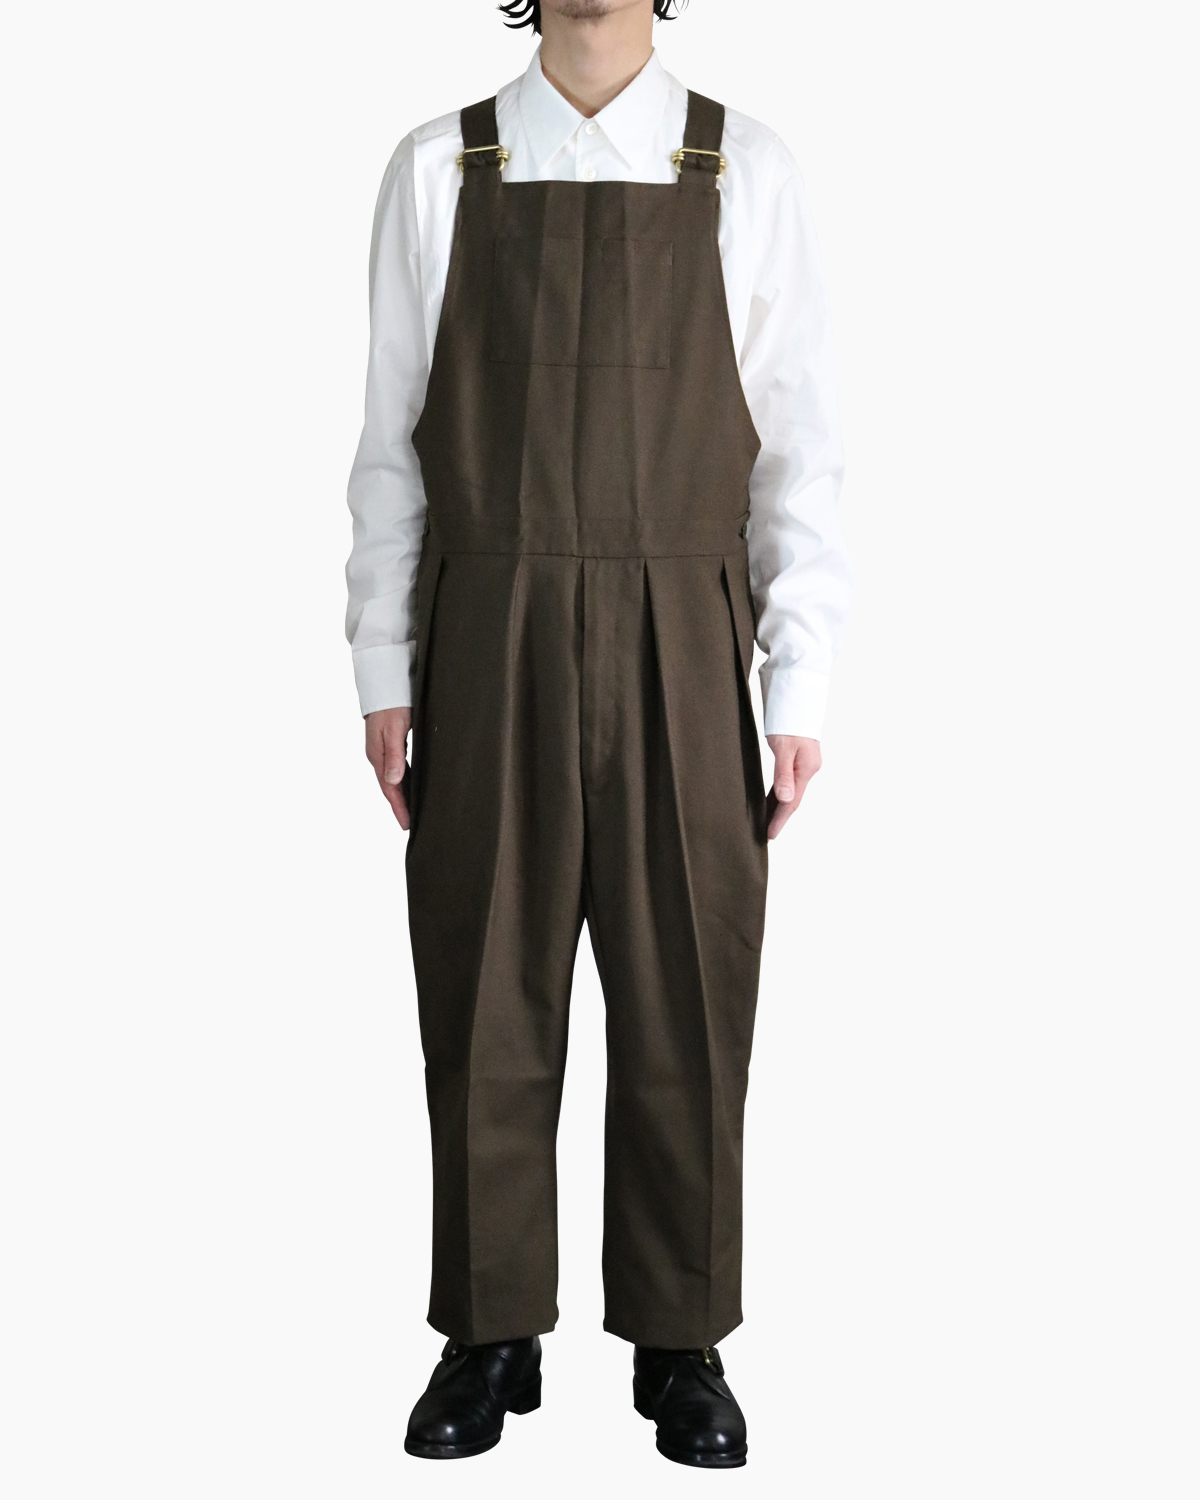 NEAT｜HOPSACK｜OVERALL - Khaki｜PRODUCT｜Continuer Inc.｜メガネ 